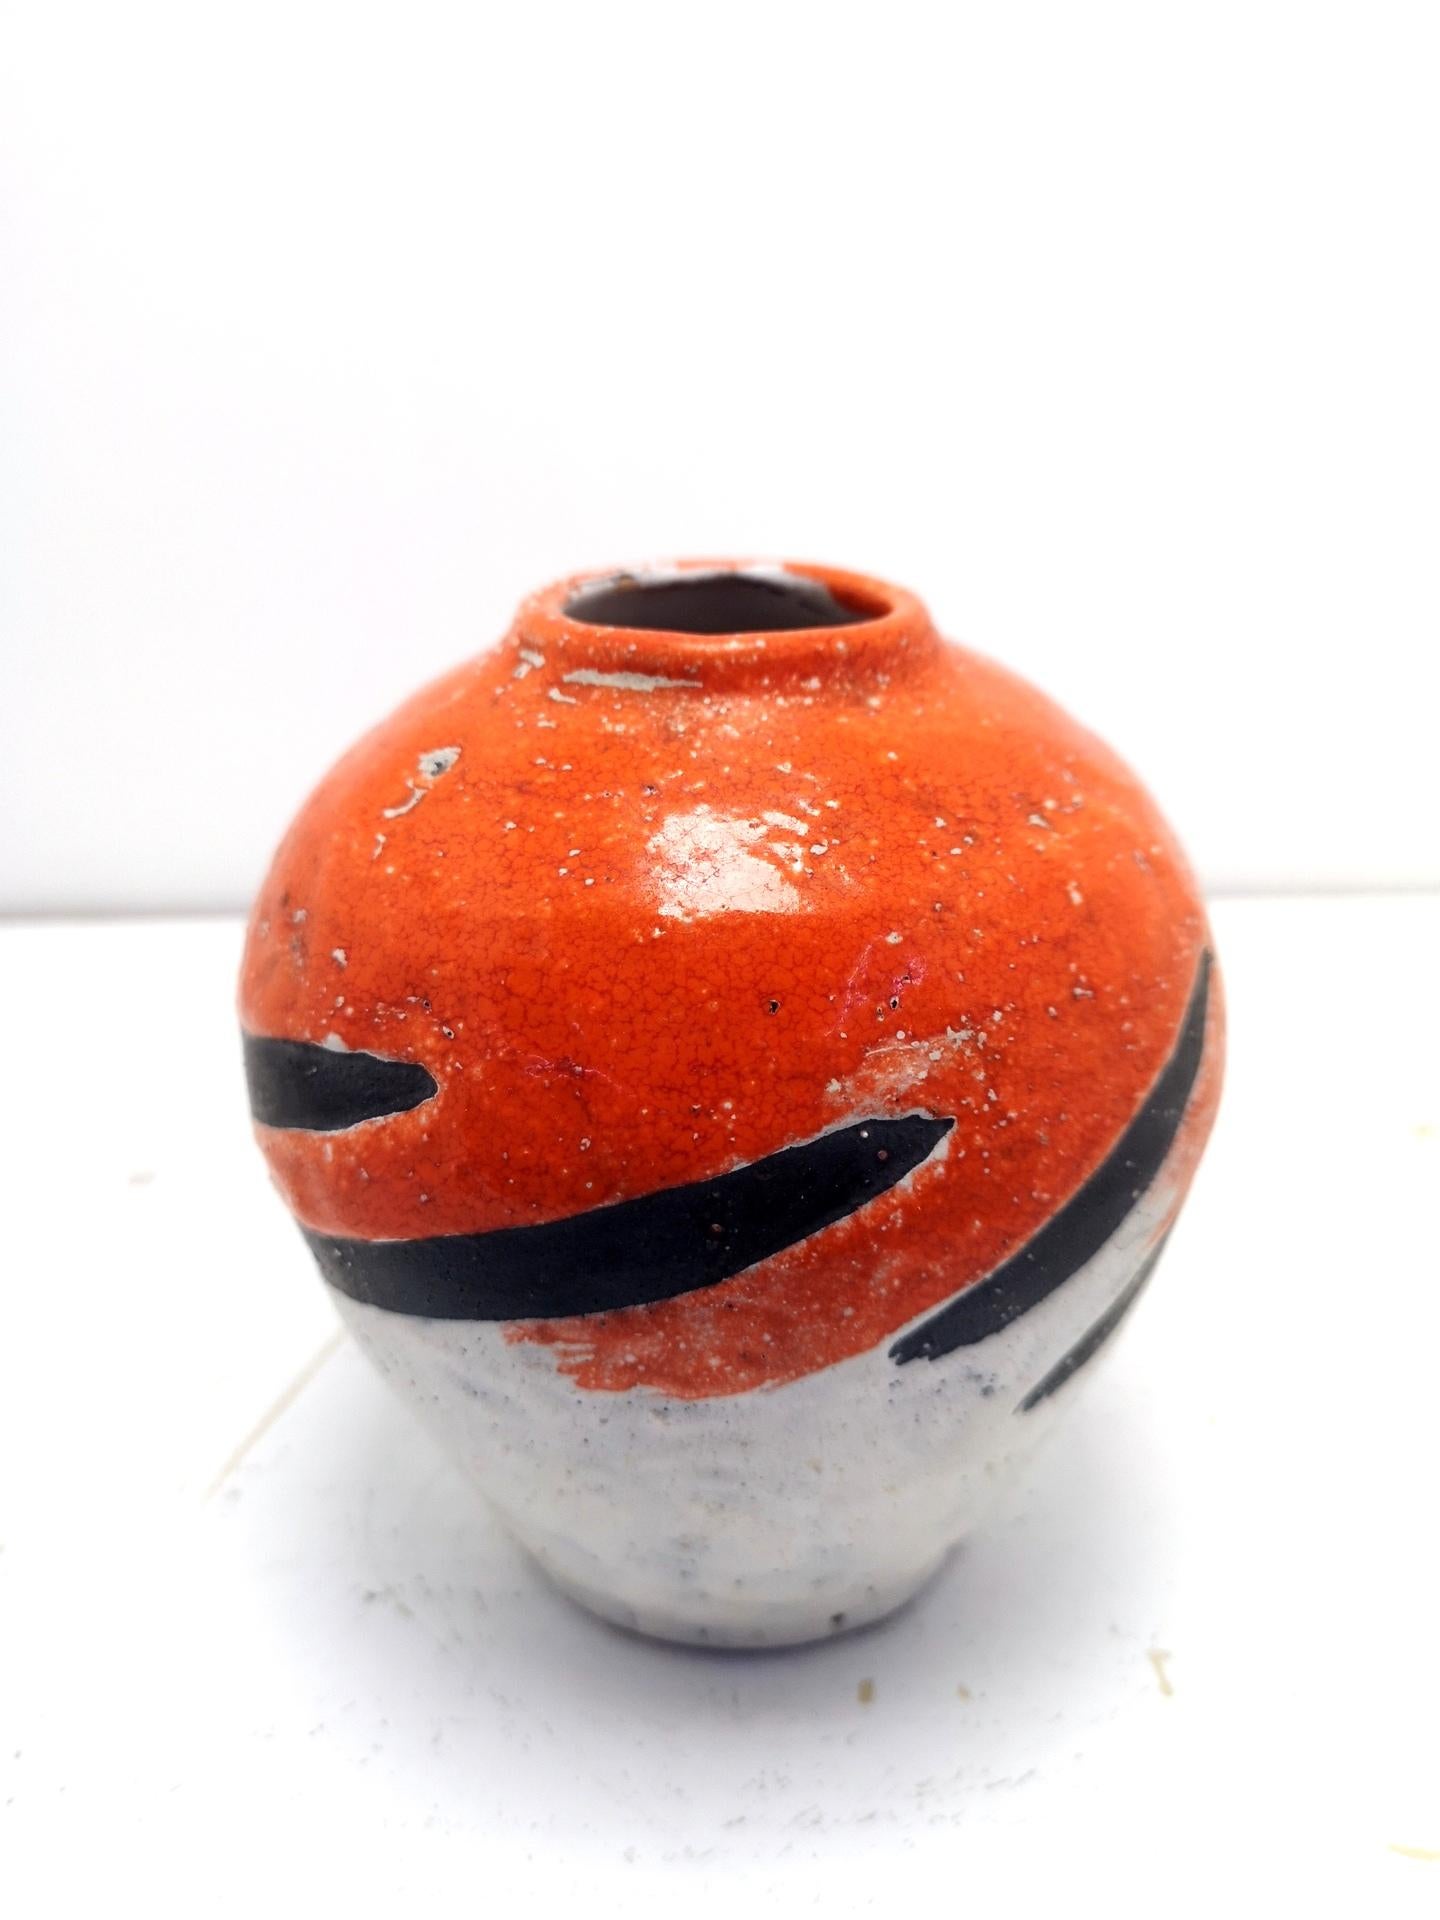 Small Mid-Century Modern vase by Livia Gorka, 1970s. Lovely hand-made piece, signed on the bottom.